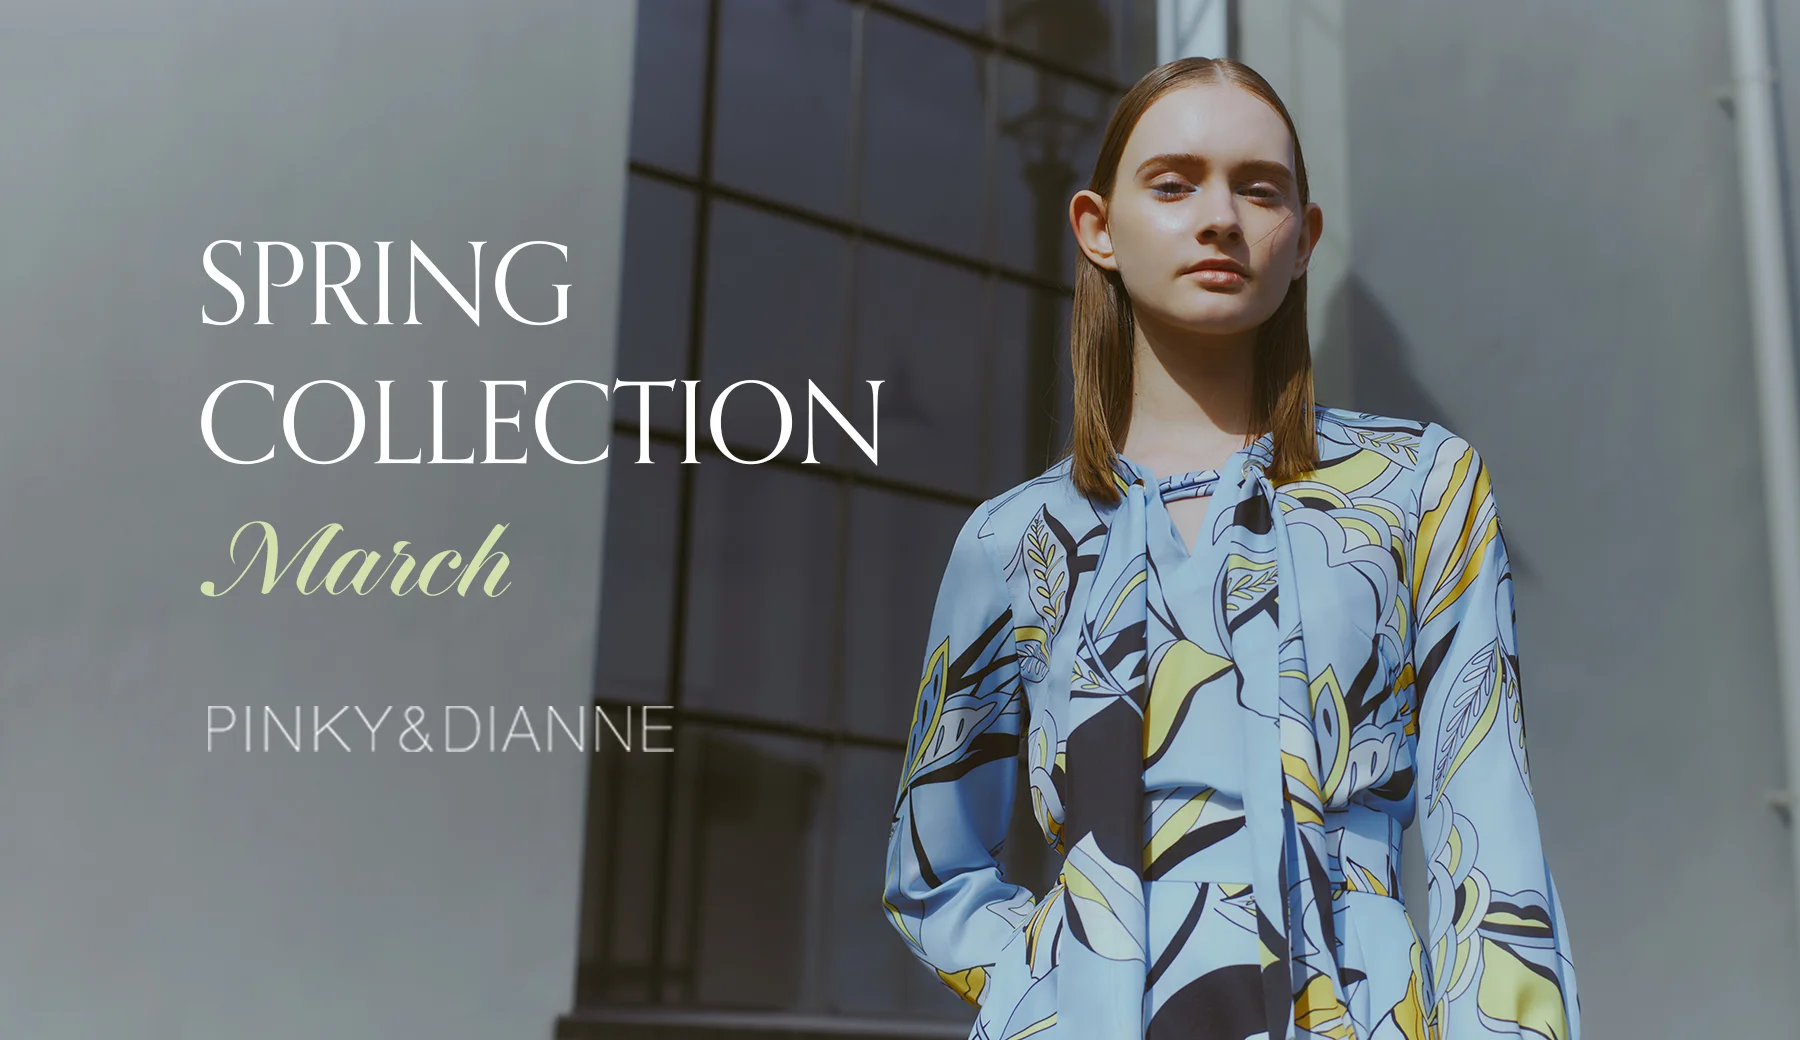 SPRING COLLECTION -March-